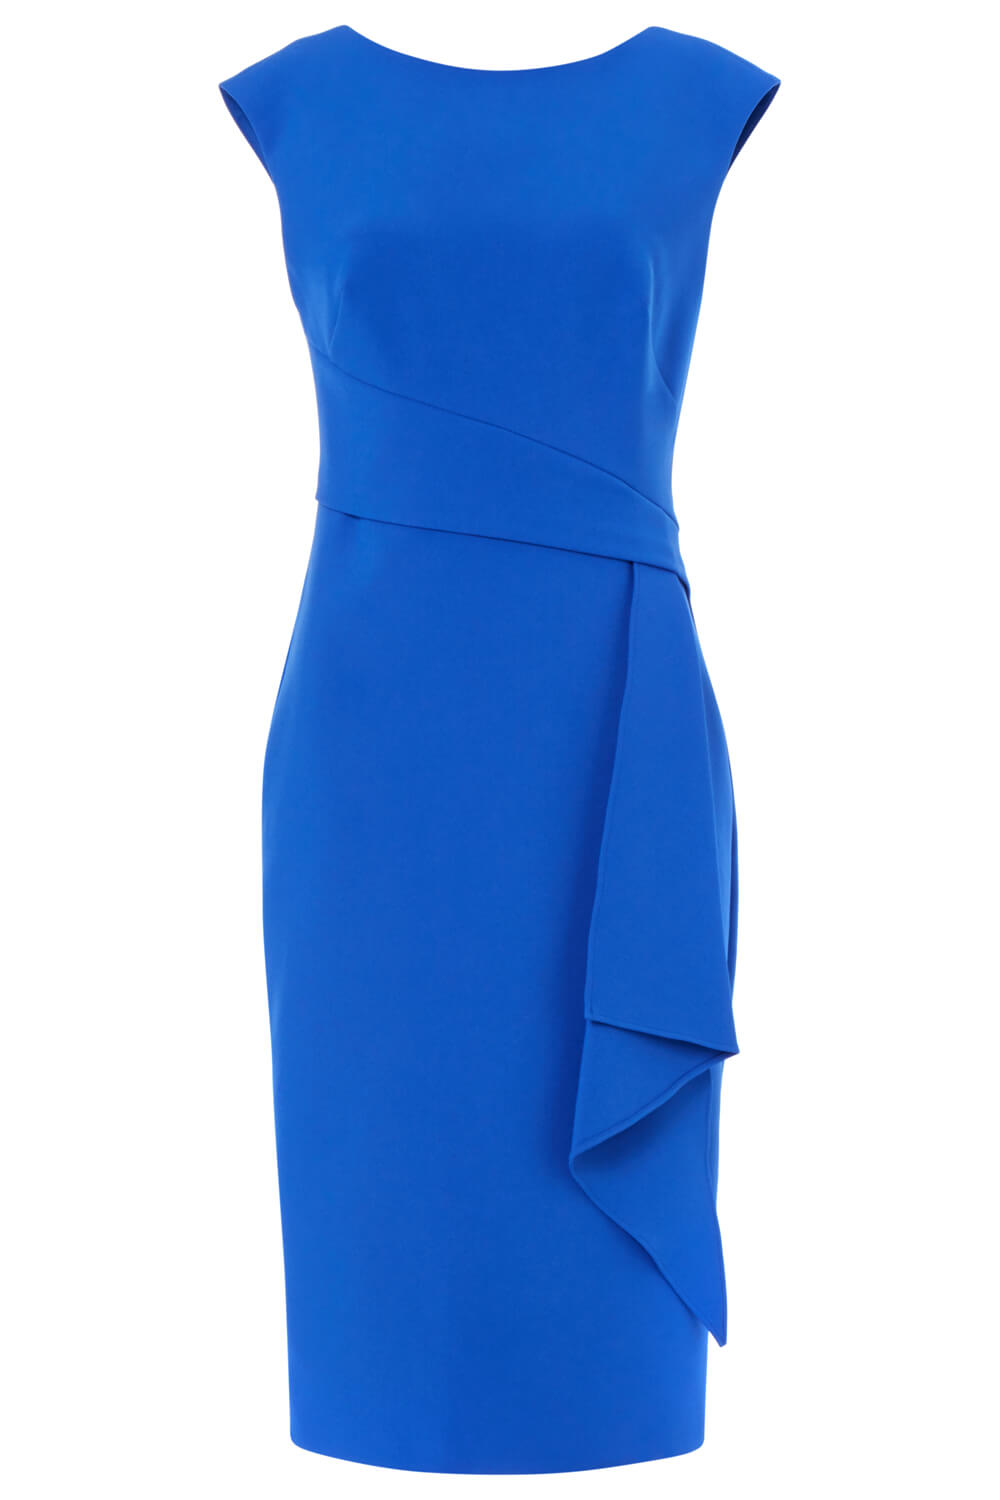 Royal Blue Ruched Waist Cocktail Dress, Image 5 of 5